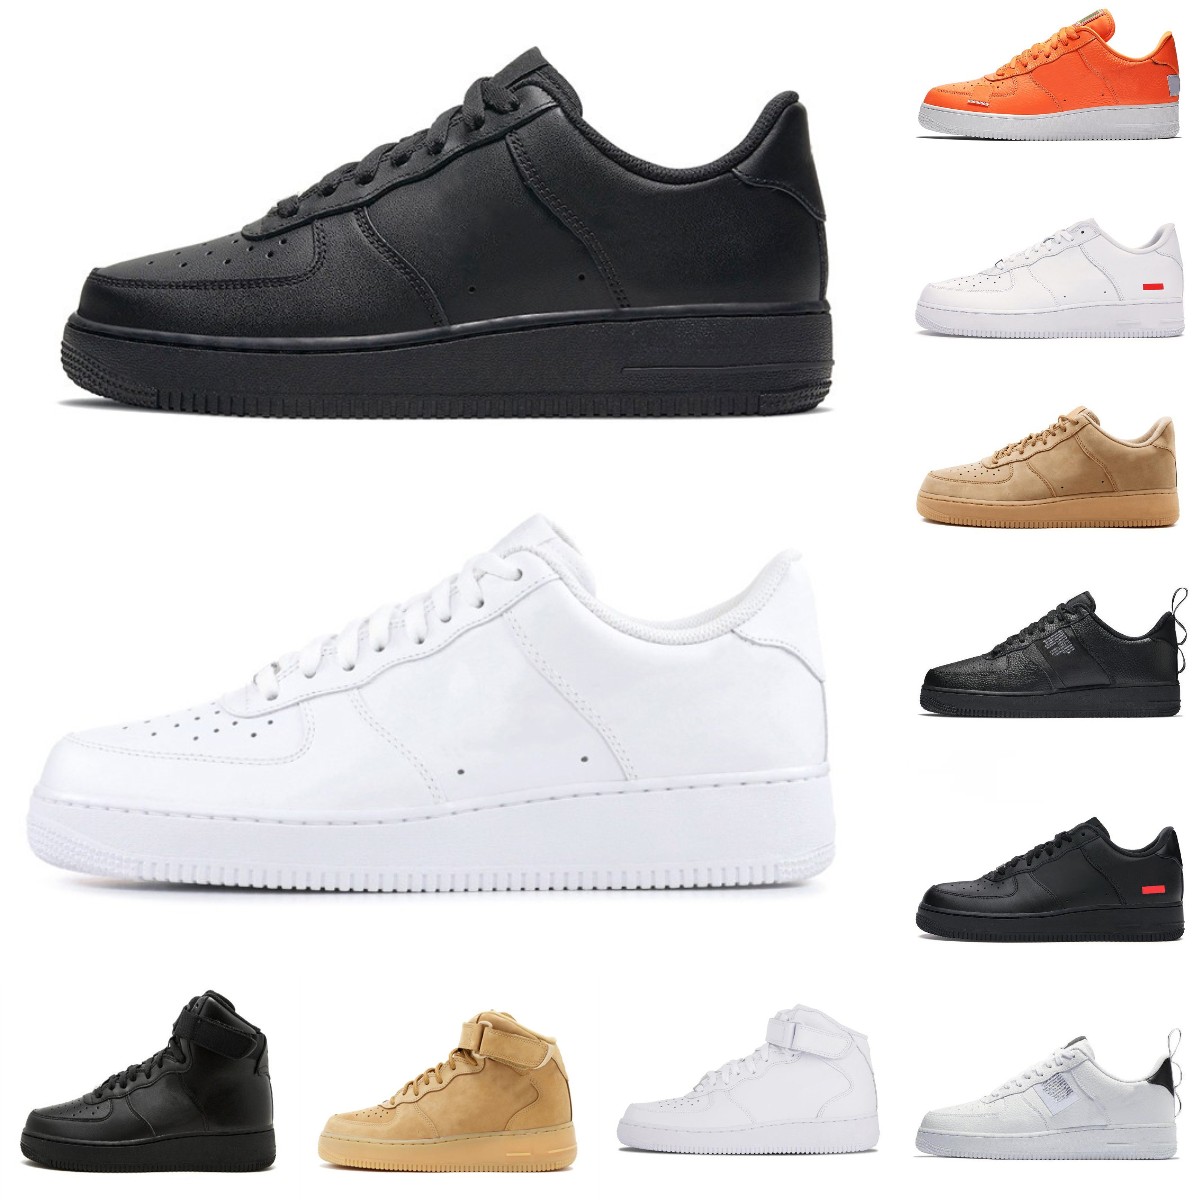 Skateboard Shoes Casaul Shoe air force 1 low Sports Sneakers All White Black Wheat Running 022 Ers Outdoor Men Low Unisex Forces Classic AF 1 07 Knit Euro Airs High 36-46